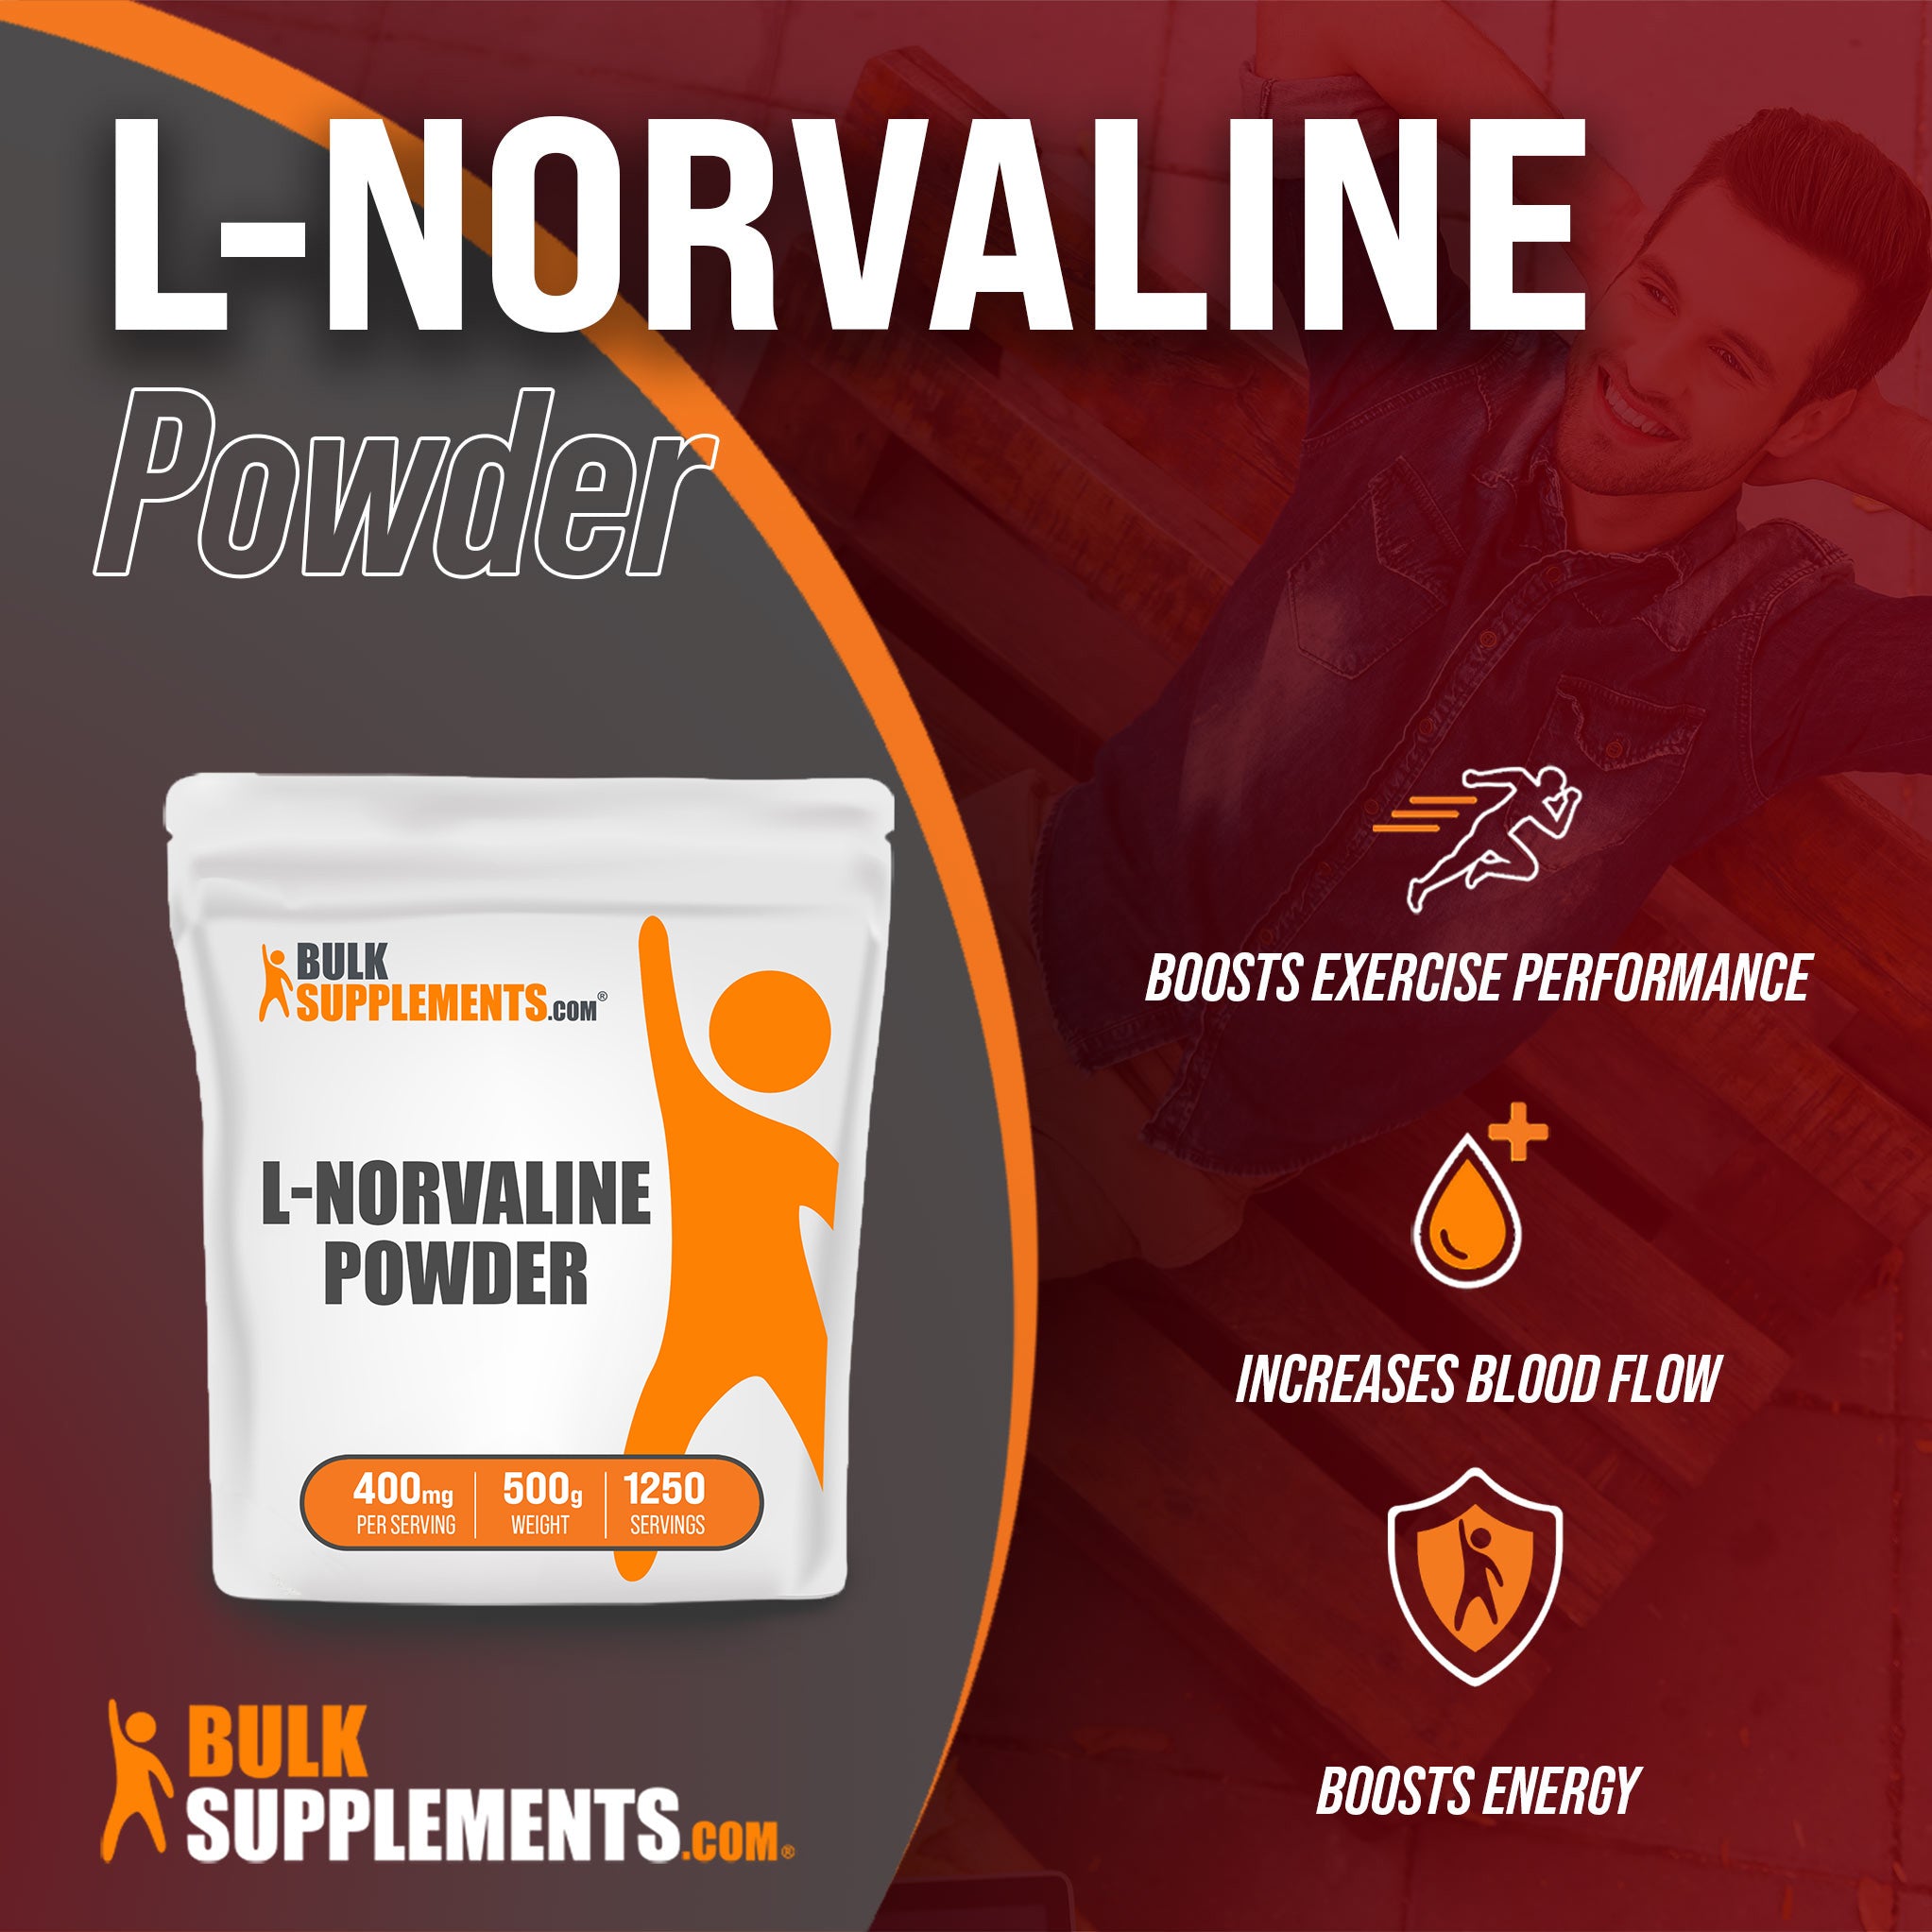 Benefits of L-Norvaline: boosts exercise performance, increases blood flow, boosts energy